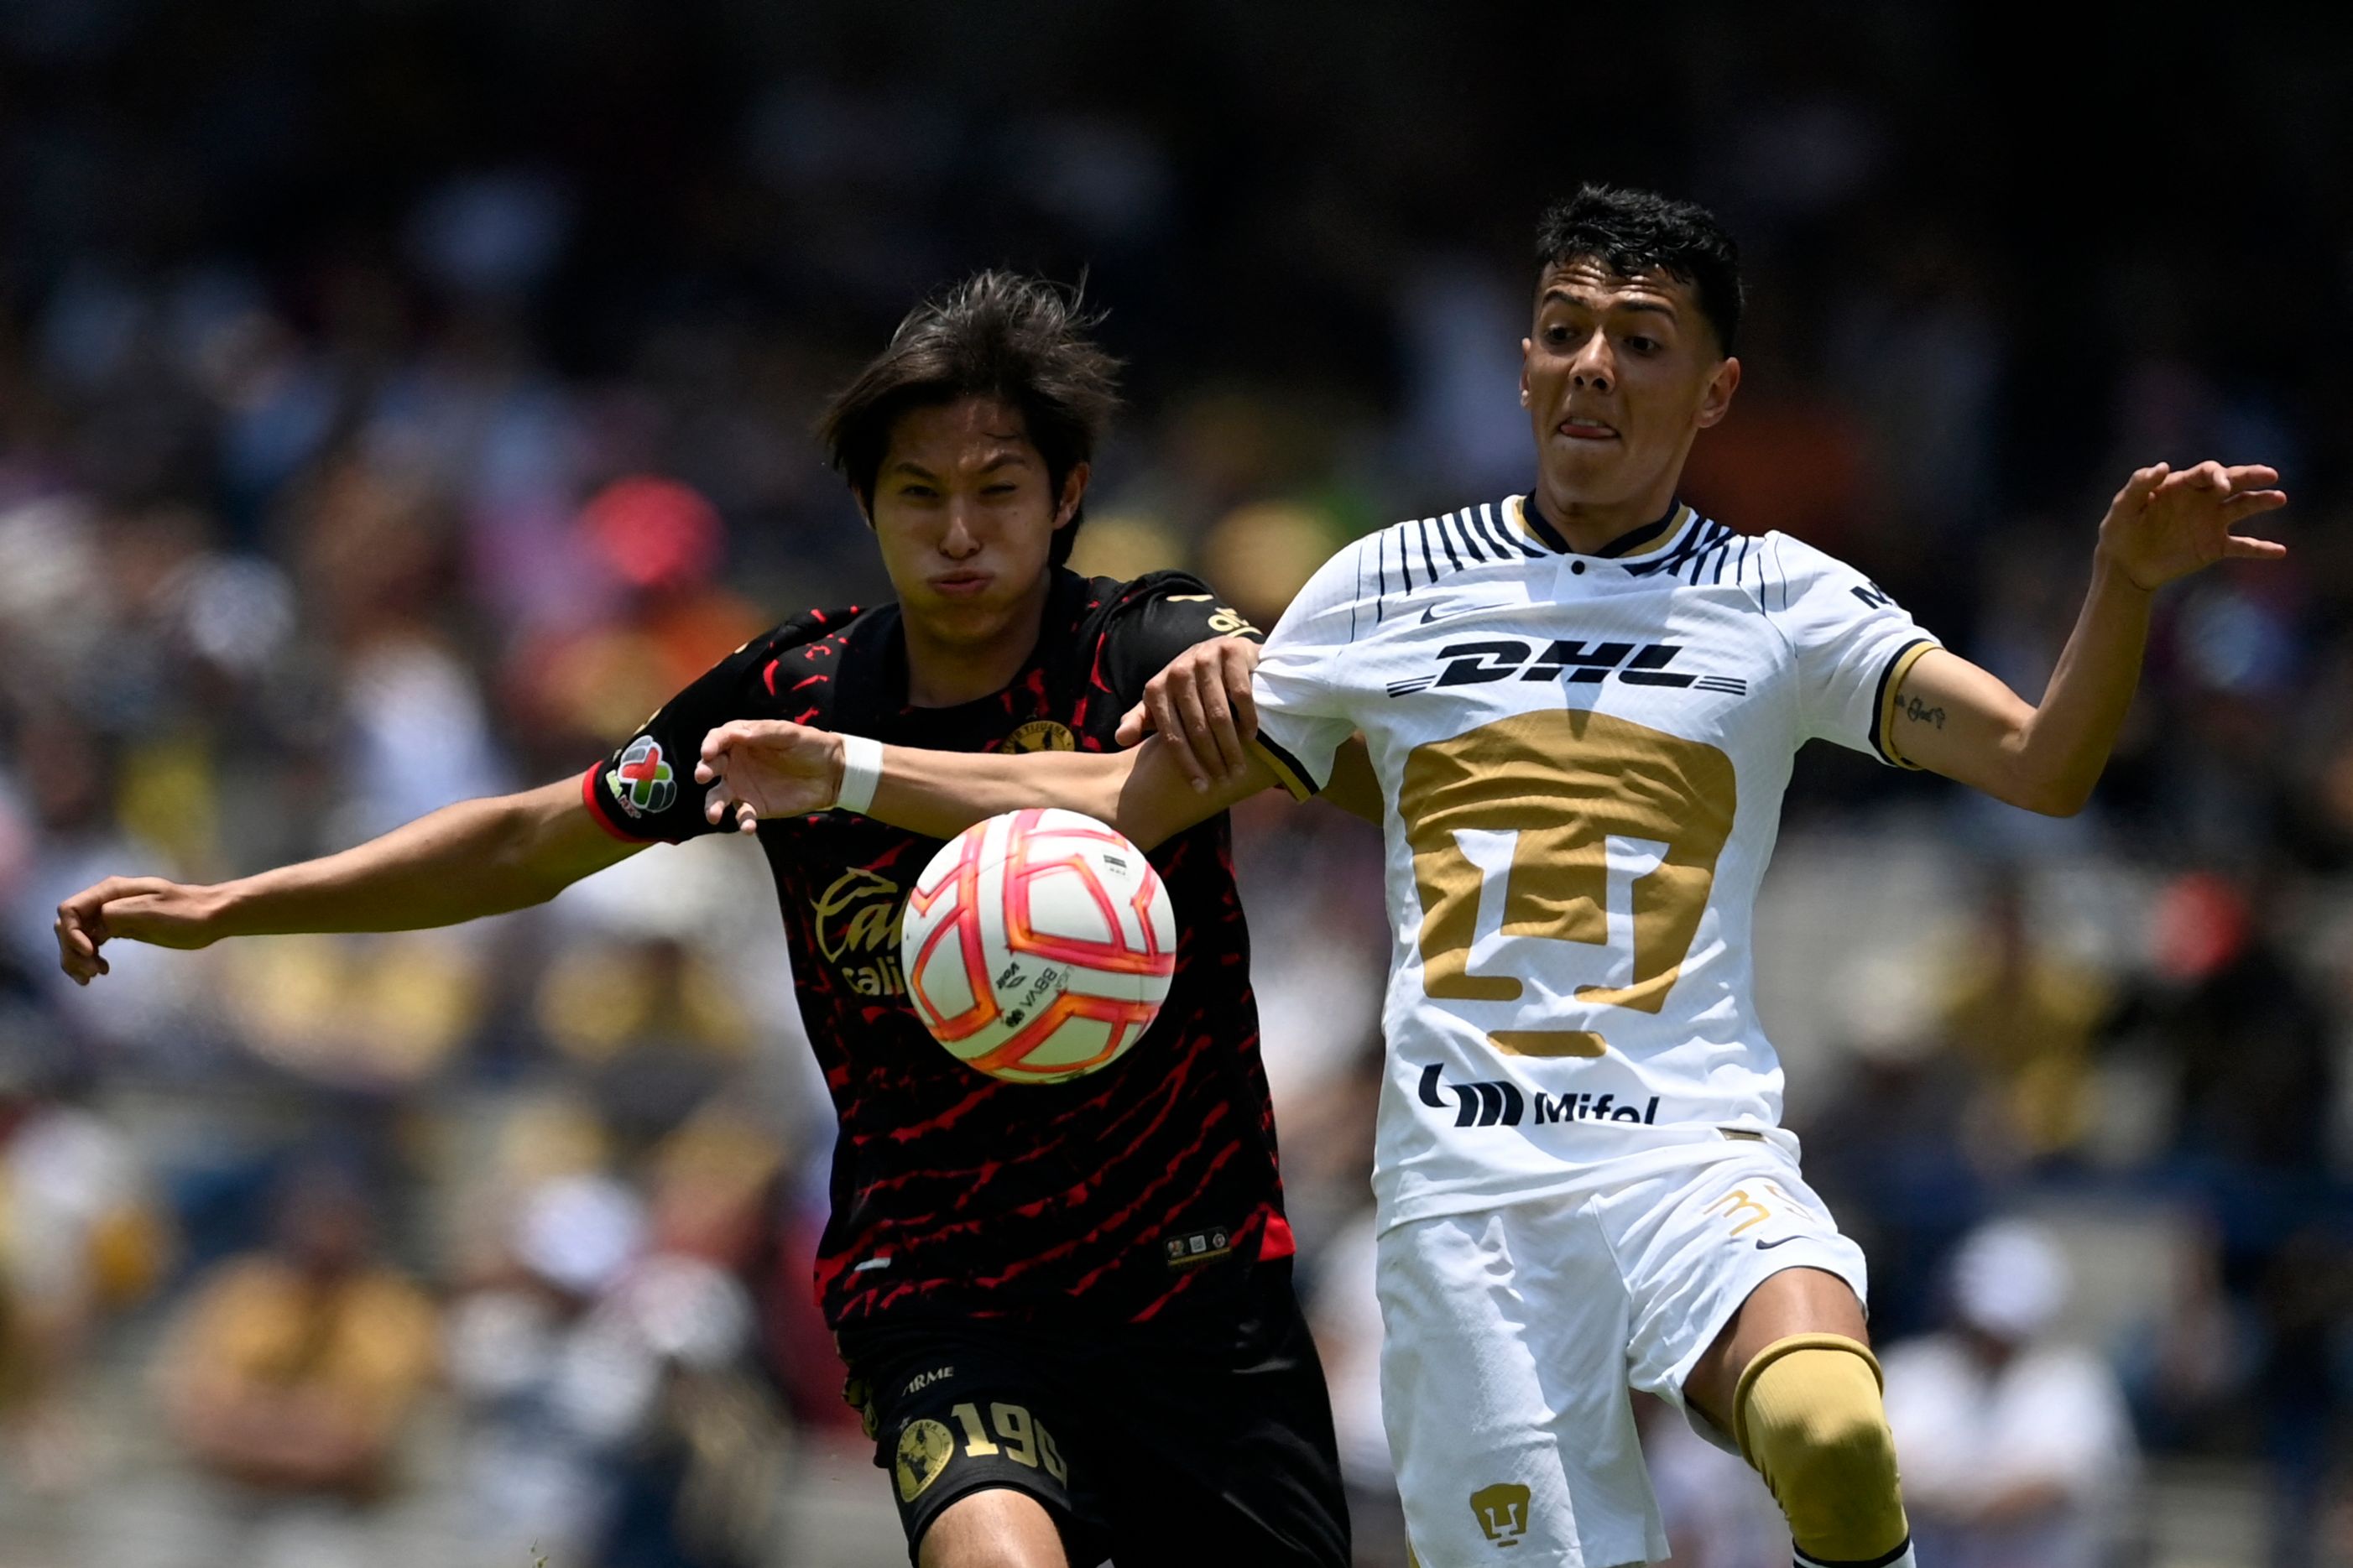 Pumas' midfielder Jorge Ruvalcaba (R) vies for the ball with Tiuana's defender Rodrigo Parra during their Mexican Apertura 2022 tournament football match at the University Olympic stadium in Mexico City, on July 3, 2022. (Photo by PEDRO PARDO / AFP)